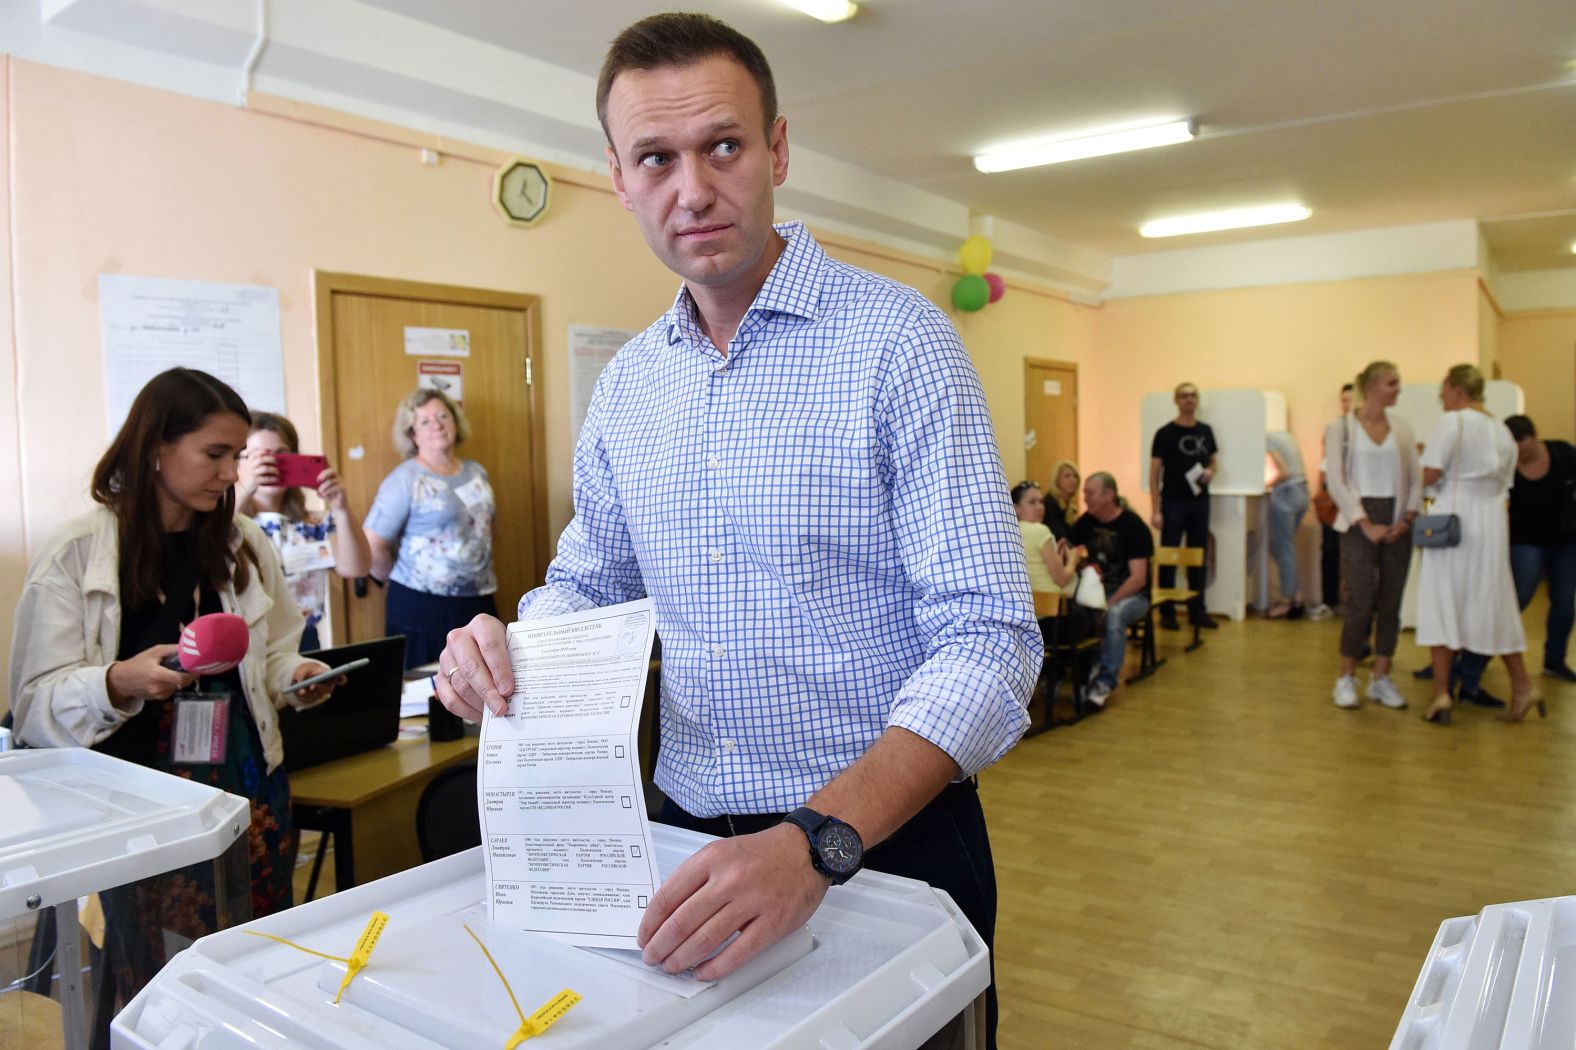 Navalny casts his vote at a polling station in Moscow in September 2019.